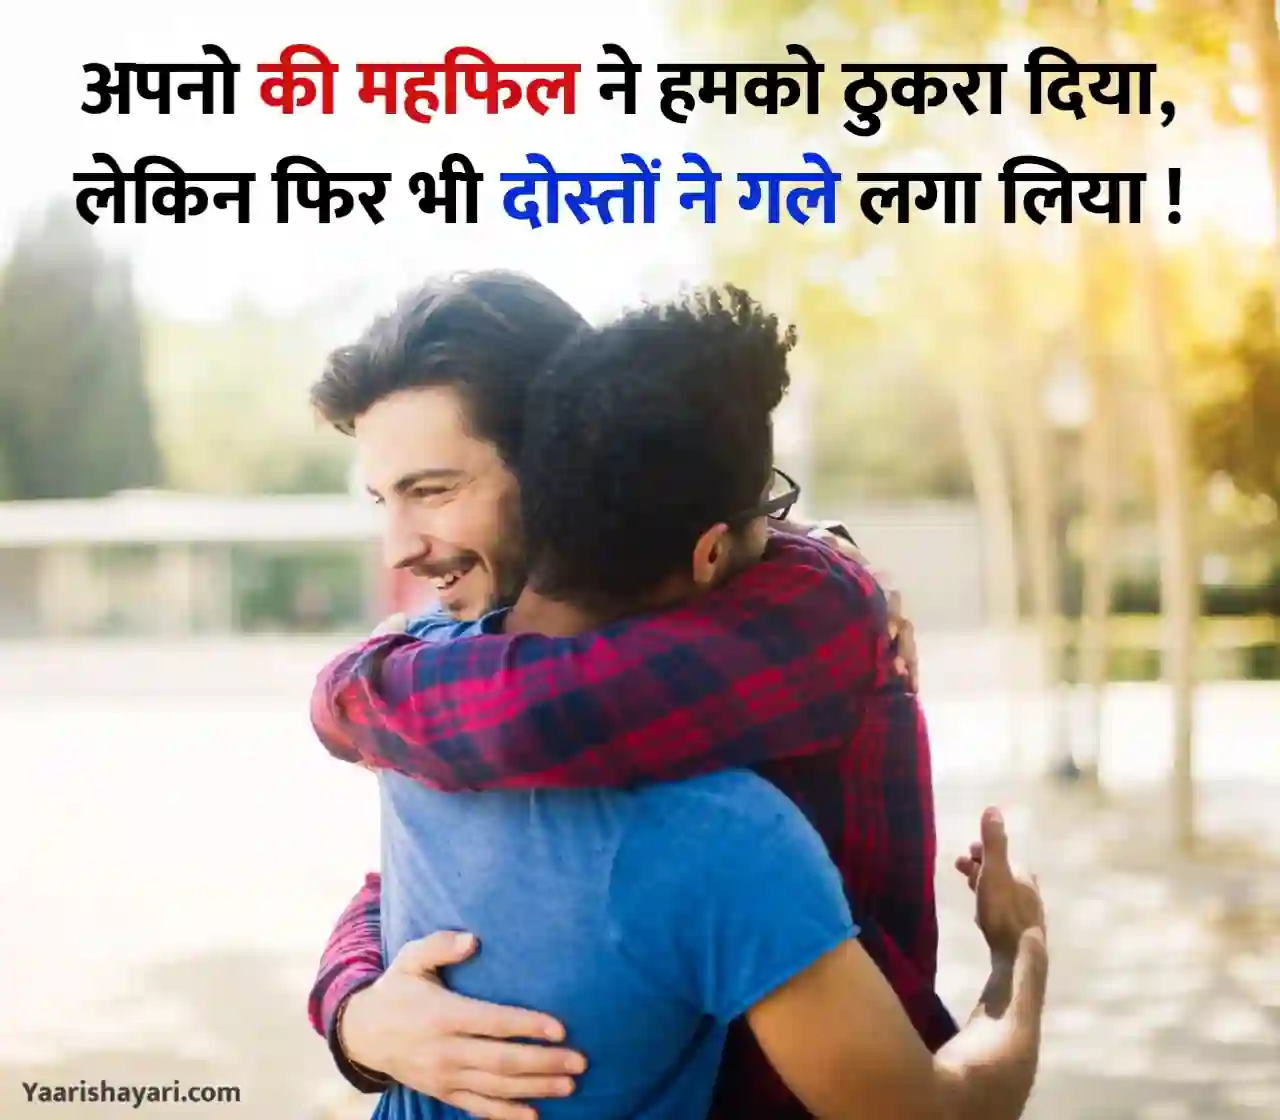 Heart Touching Friendship Quotes in Hindi | Dosti Quotes